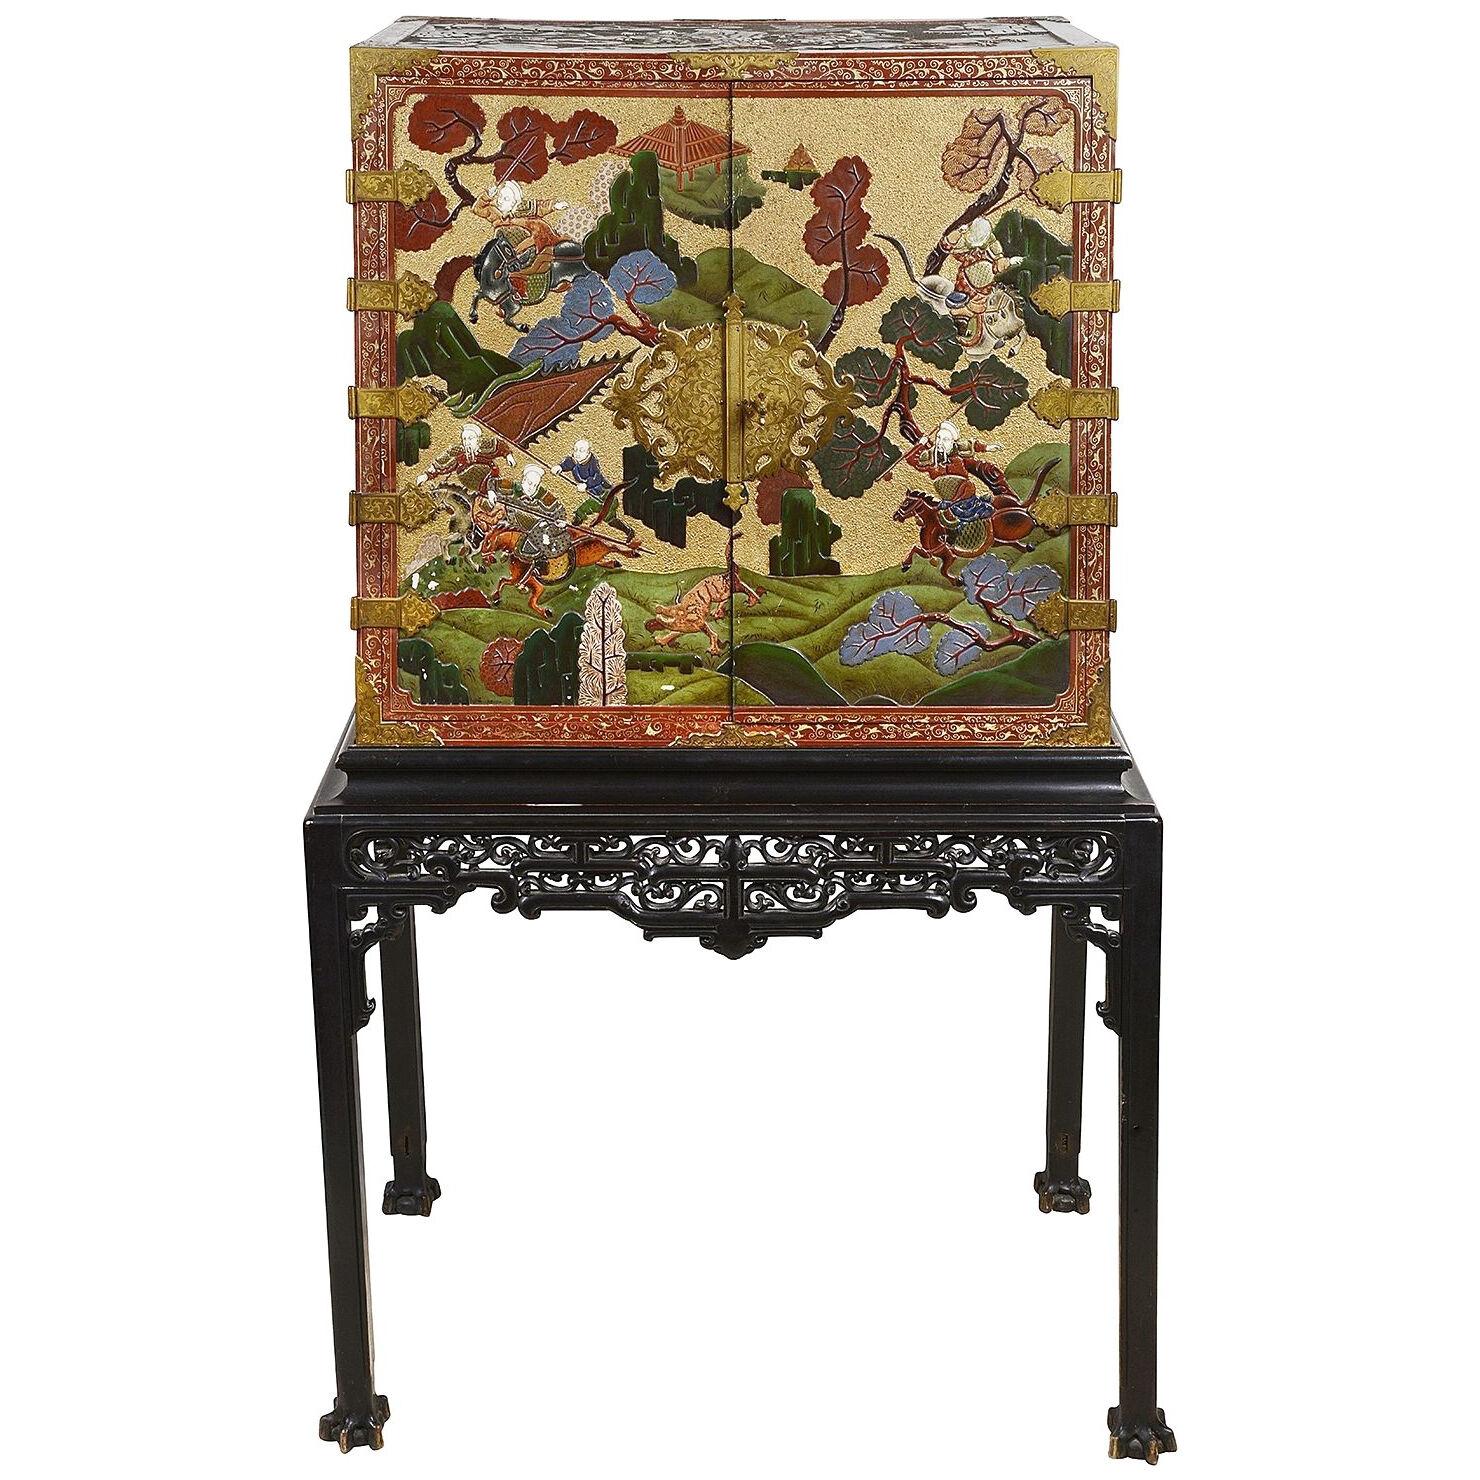 Late 19th Century Chinese Export lacquer cabinet on stand.